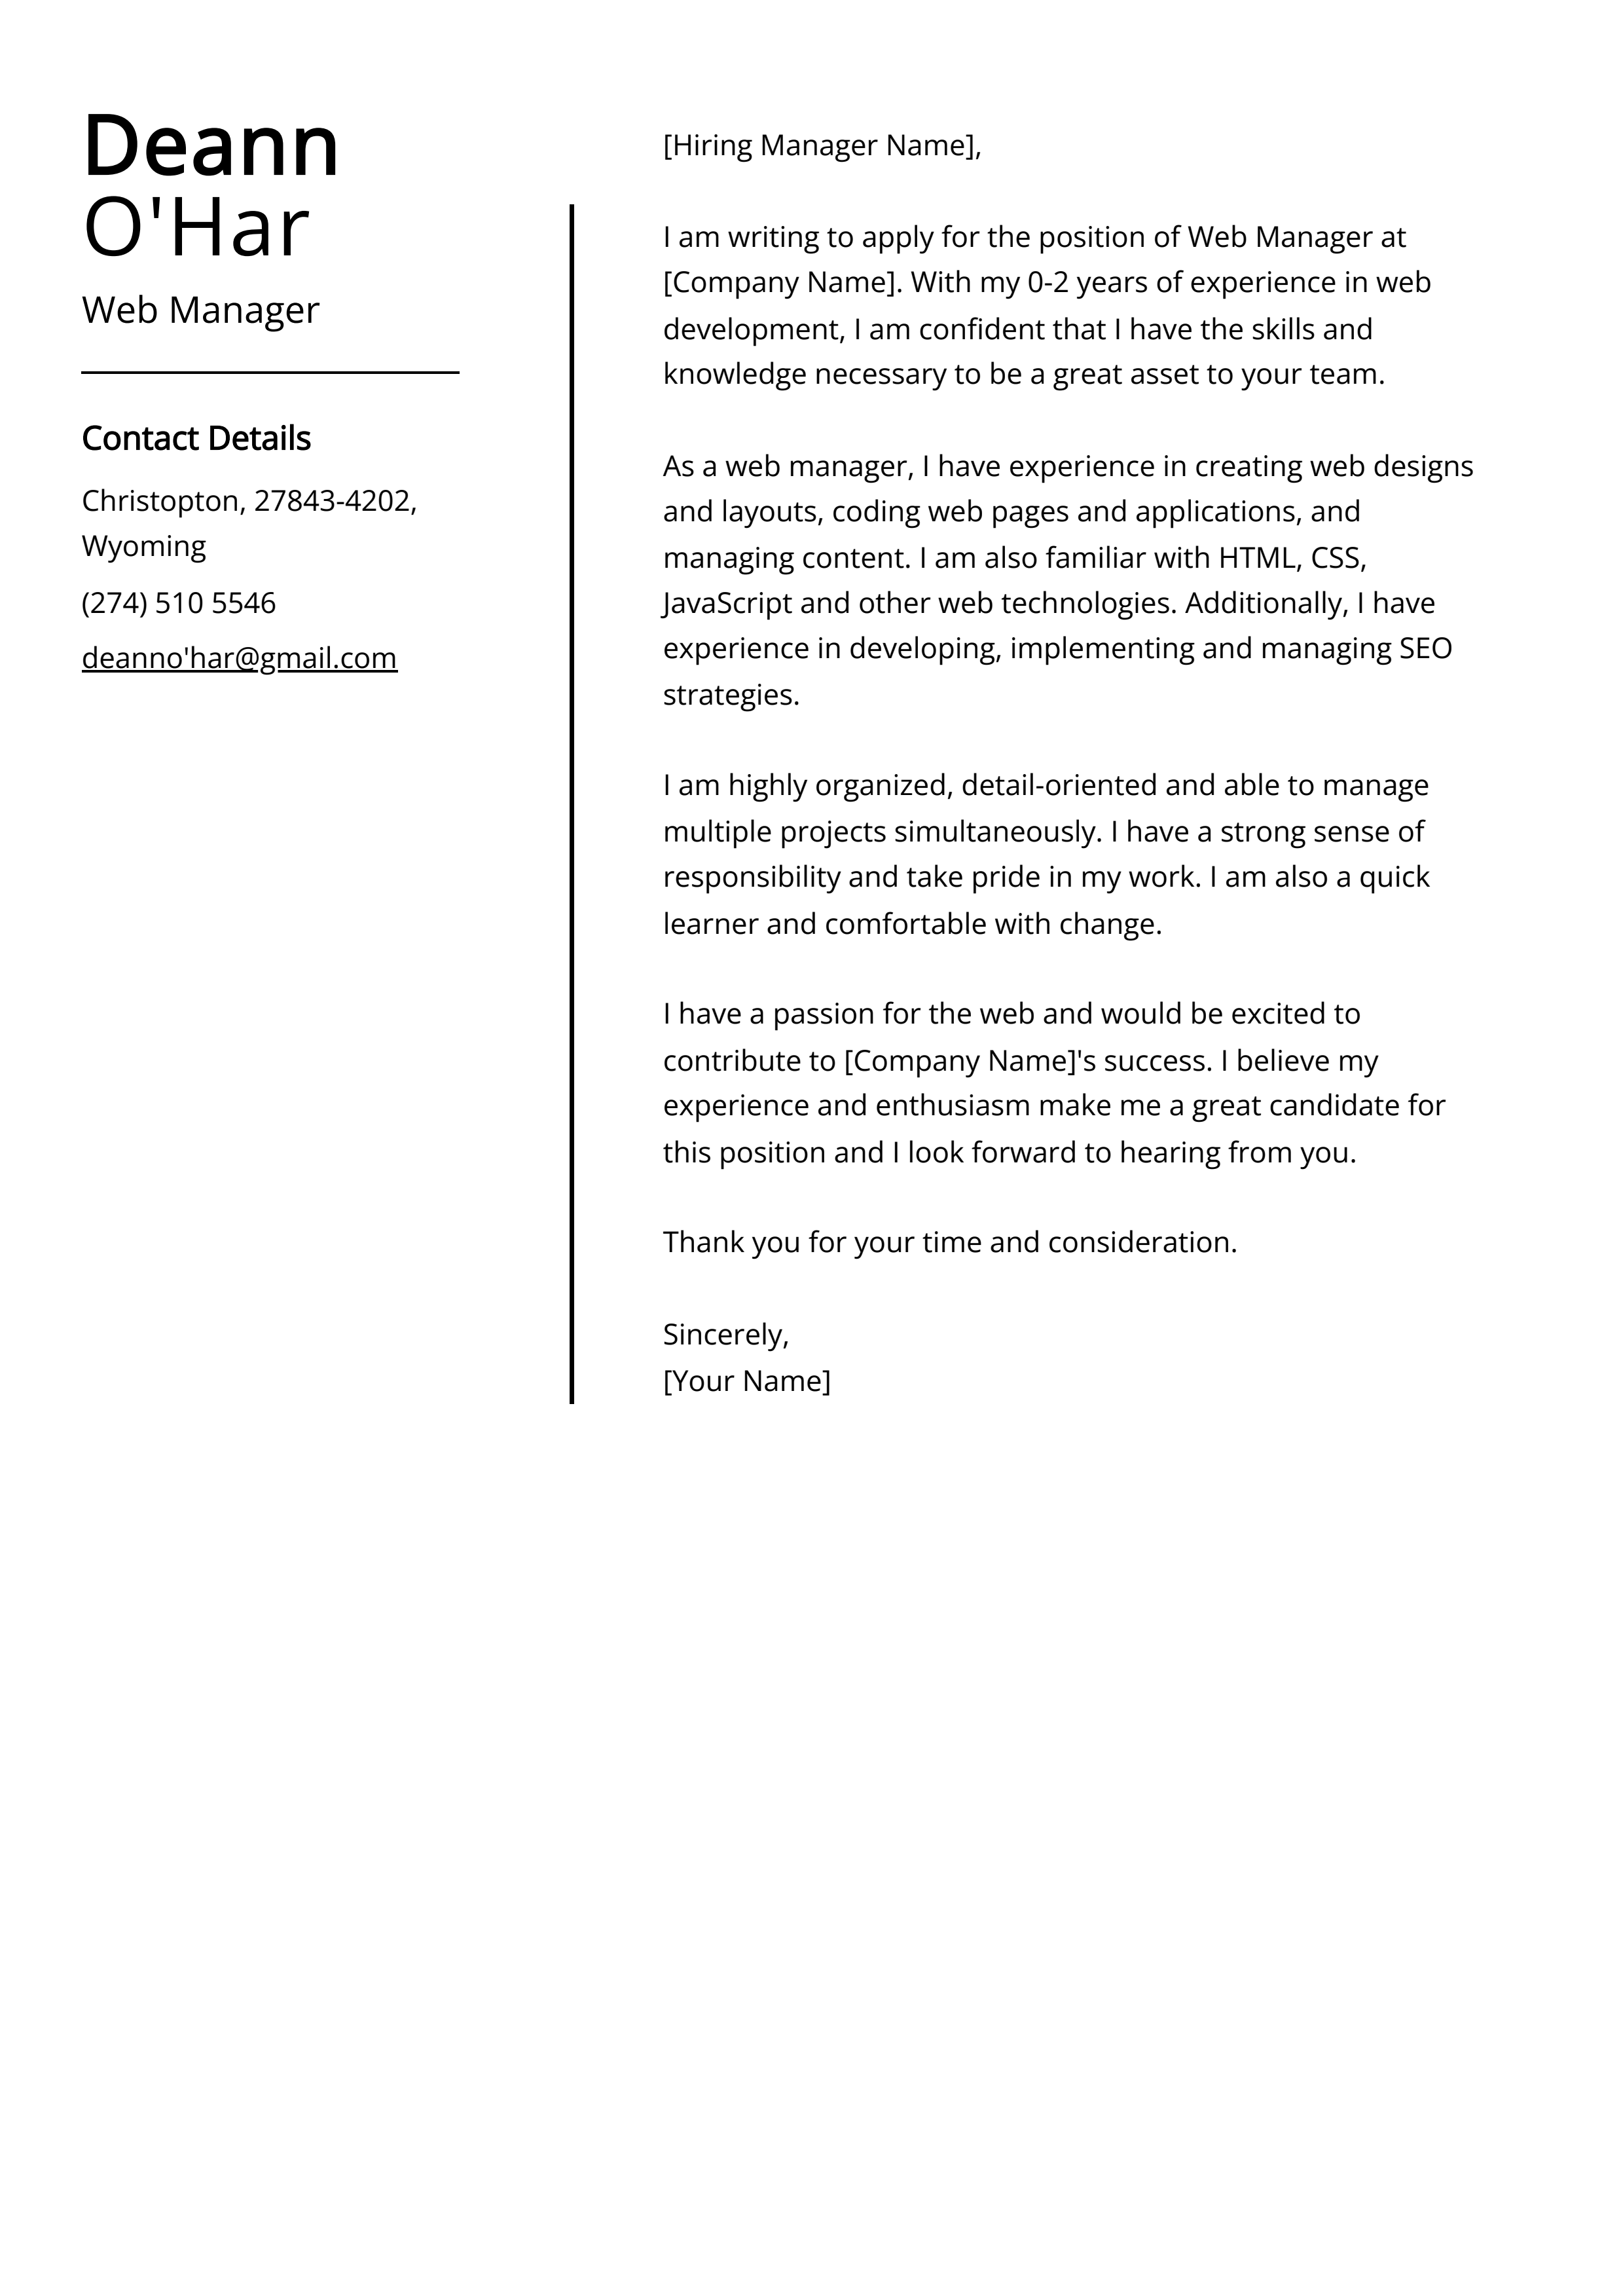 Web Manager Cover Letter Example